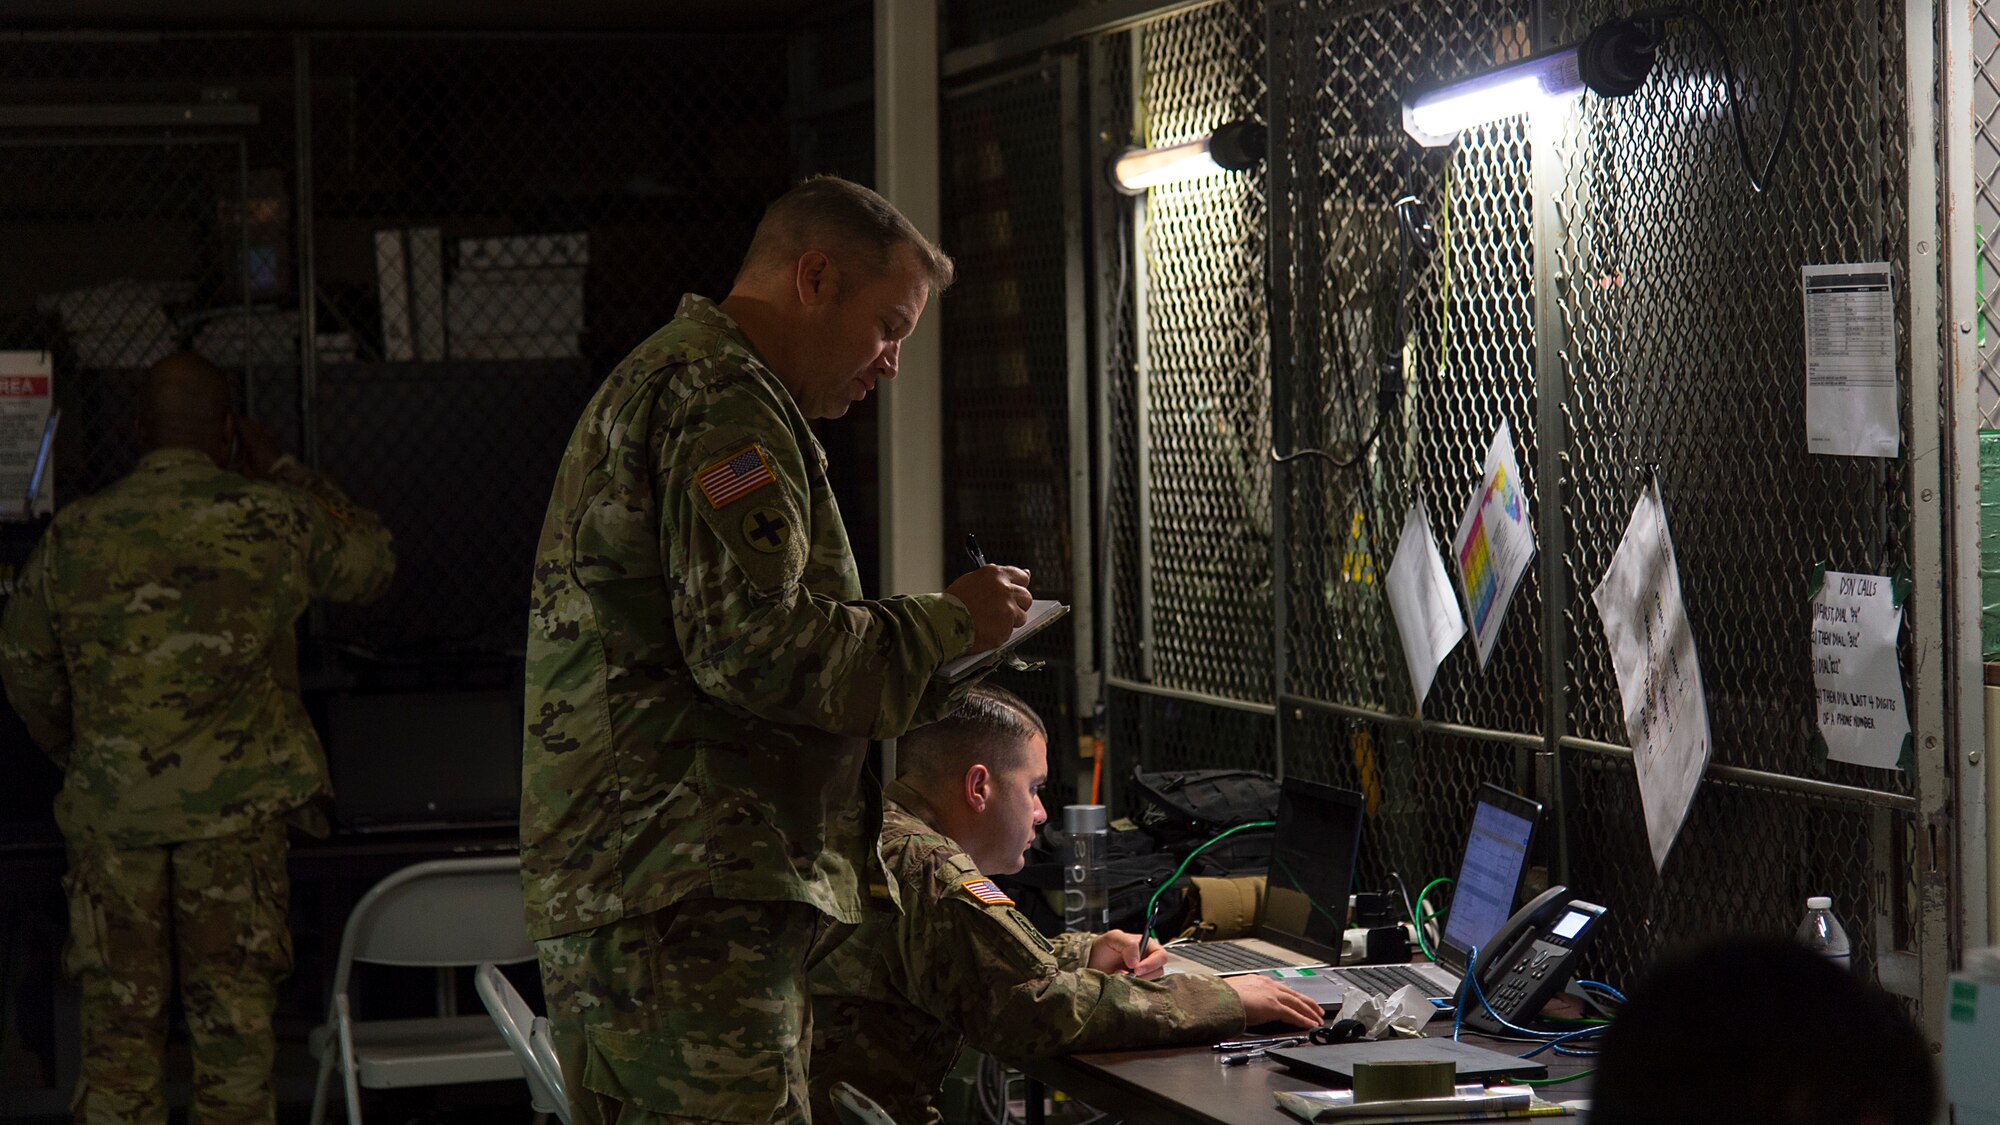 U.S. Army National Guard Soldiers coordinate response teams at the Florida National Guard Armory tactical operations center in Panama City, Fla., Oct. 13, 2018. The 290th Joint Communications Support Squadron and the Joint Communications Support Element from MacDill Air Force Base restored TOC communications capabilities several days prior, enabling command and control for relief efforts. (U.S. Air Force photo by Airman 1st Class Caleb Nunez)